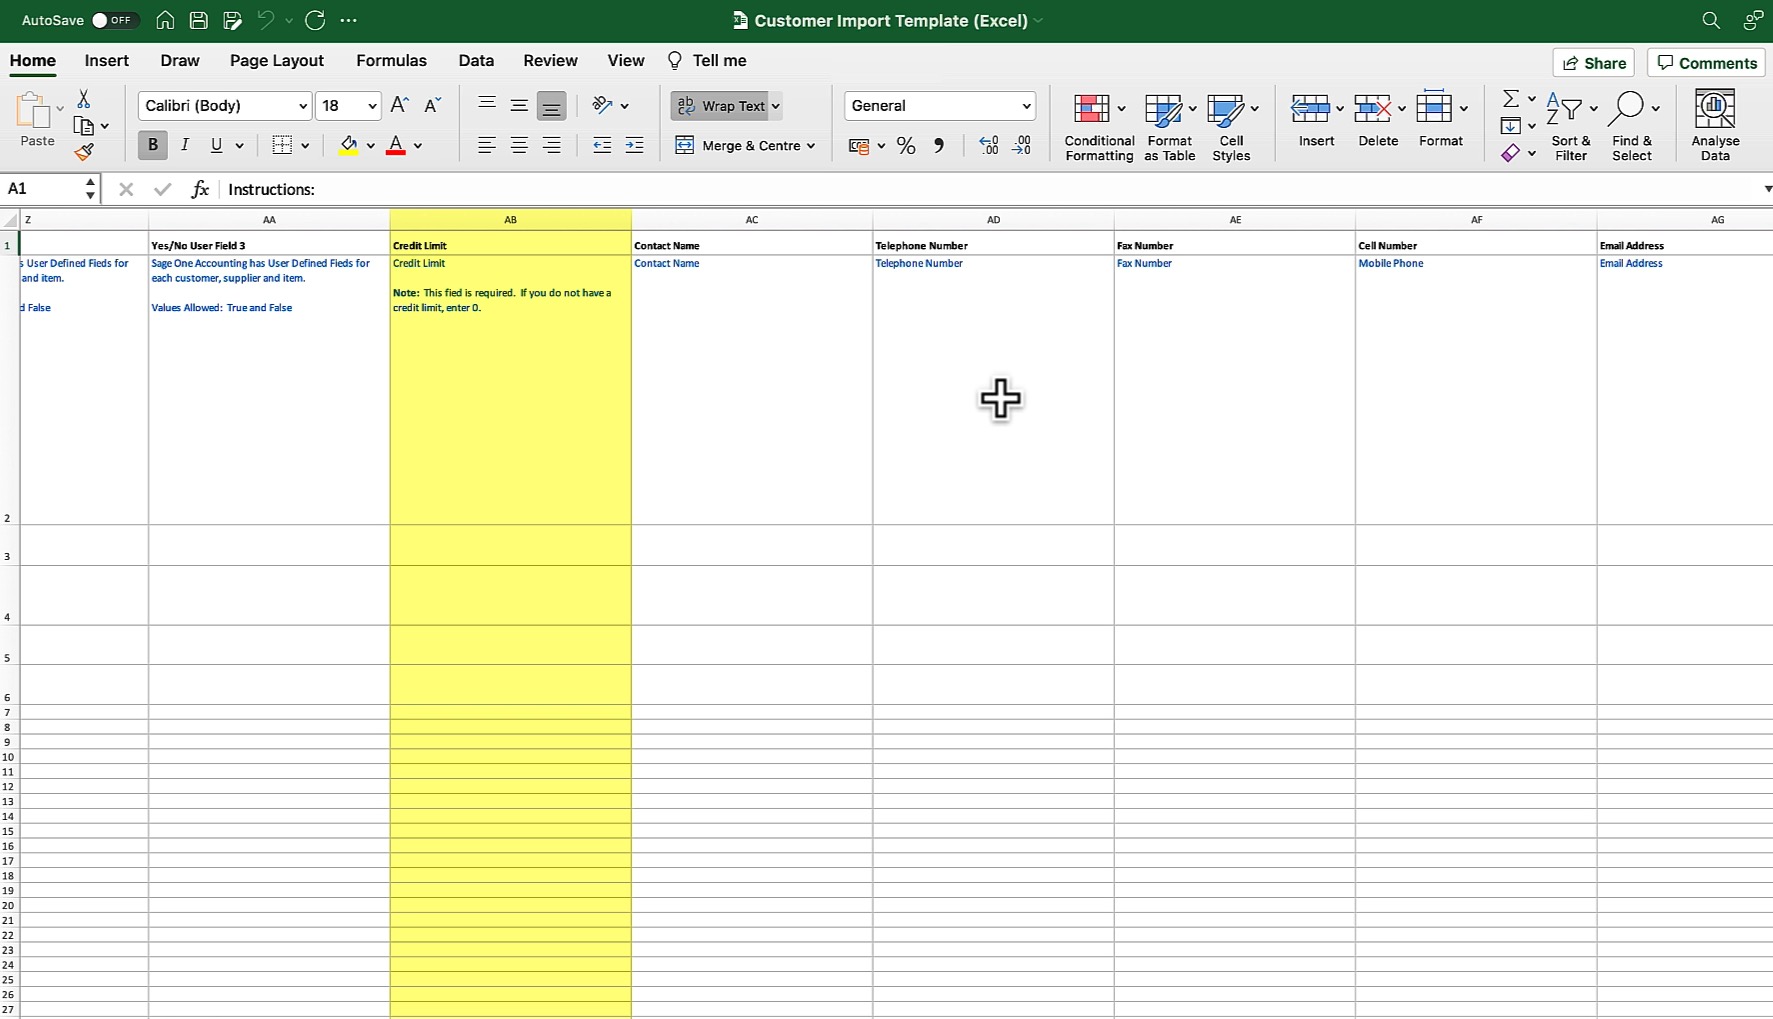 Comparing customised grid with customer import template in Sage by The Fun Accountant.